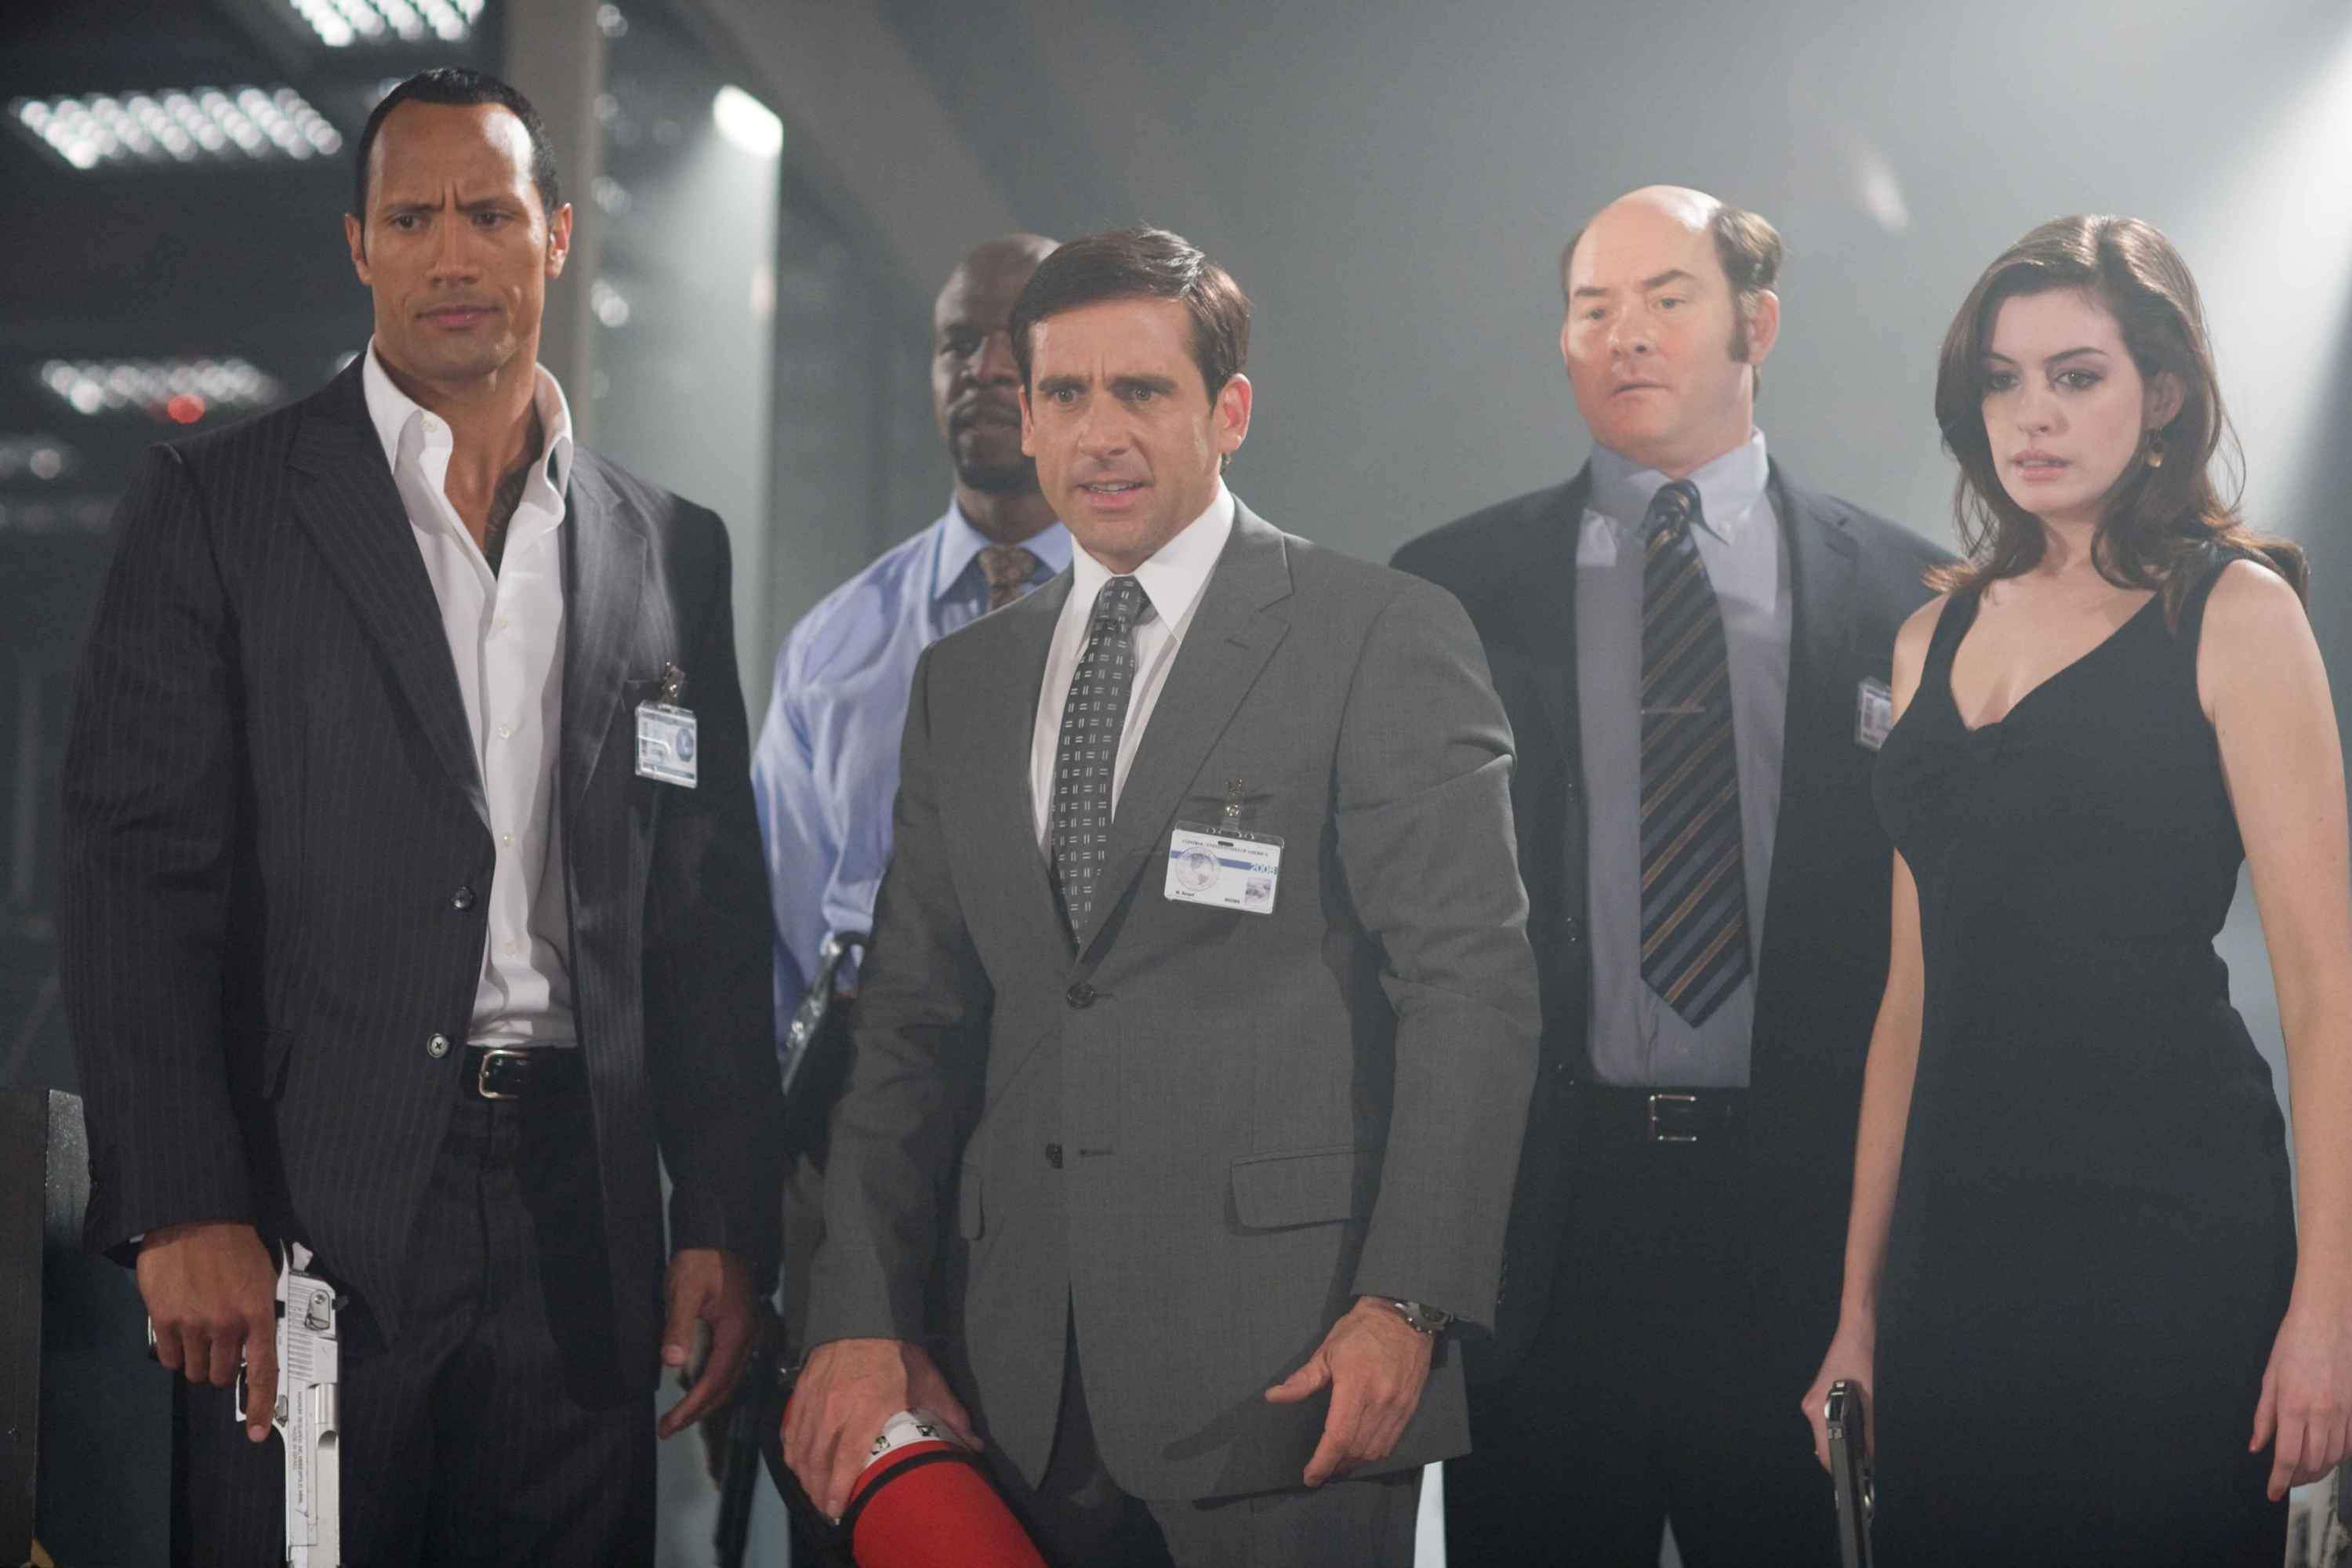 (L-R) The Rock, Steve Carell, David Koechner and Anne Hathaway in Warner Bros Pictures' Get Smart (2008). Photo by Tracy Bennett.